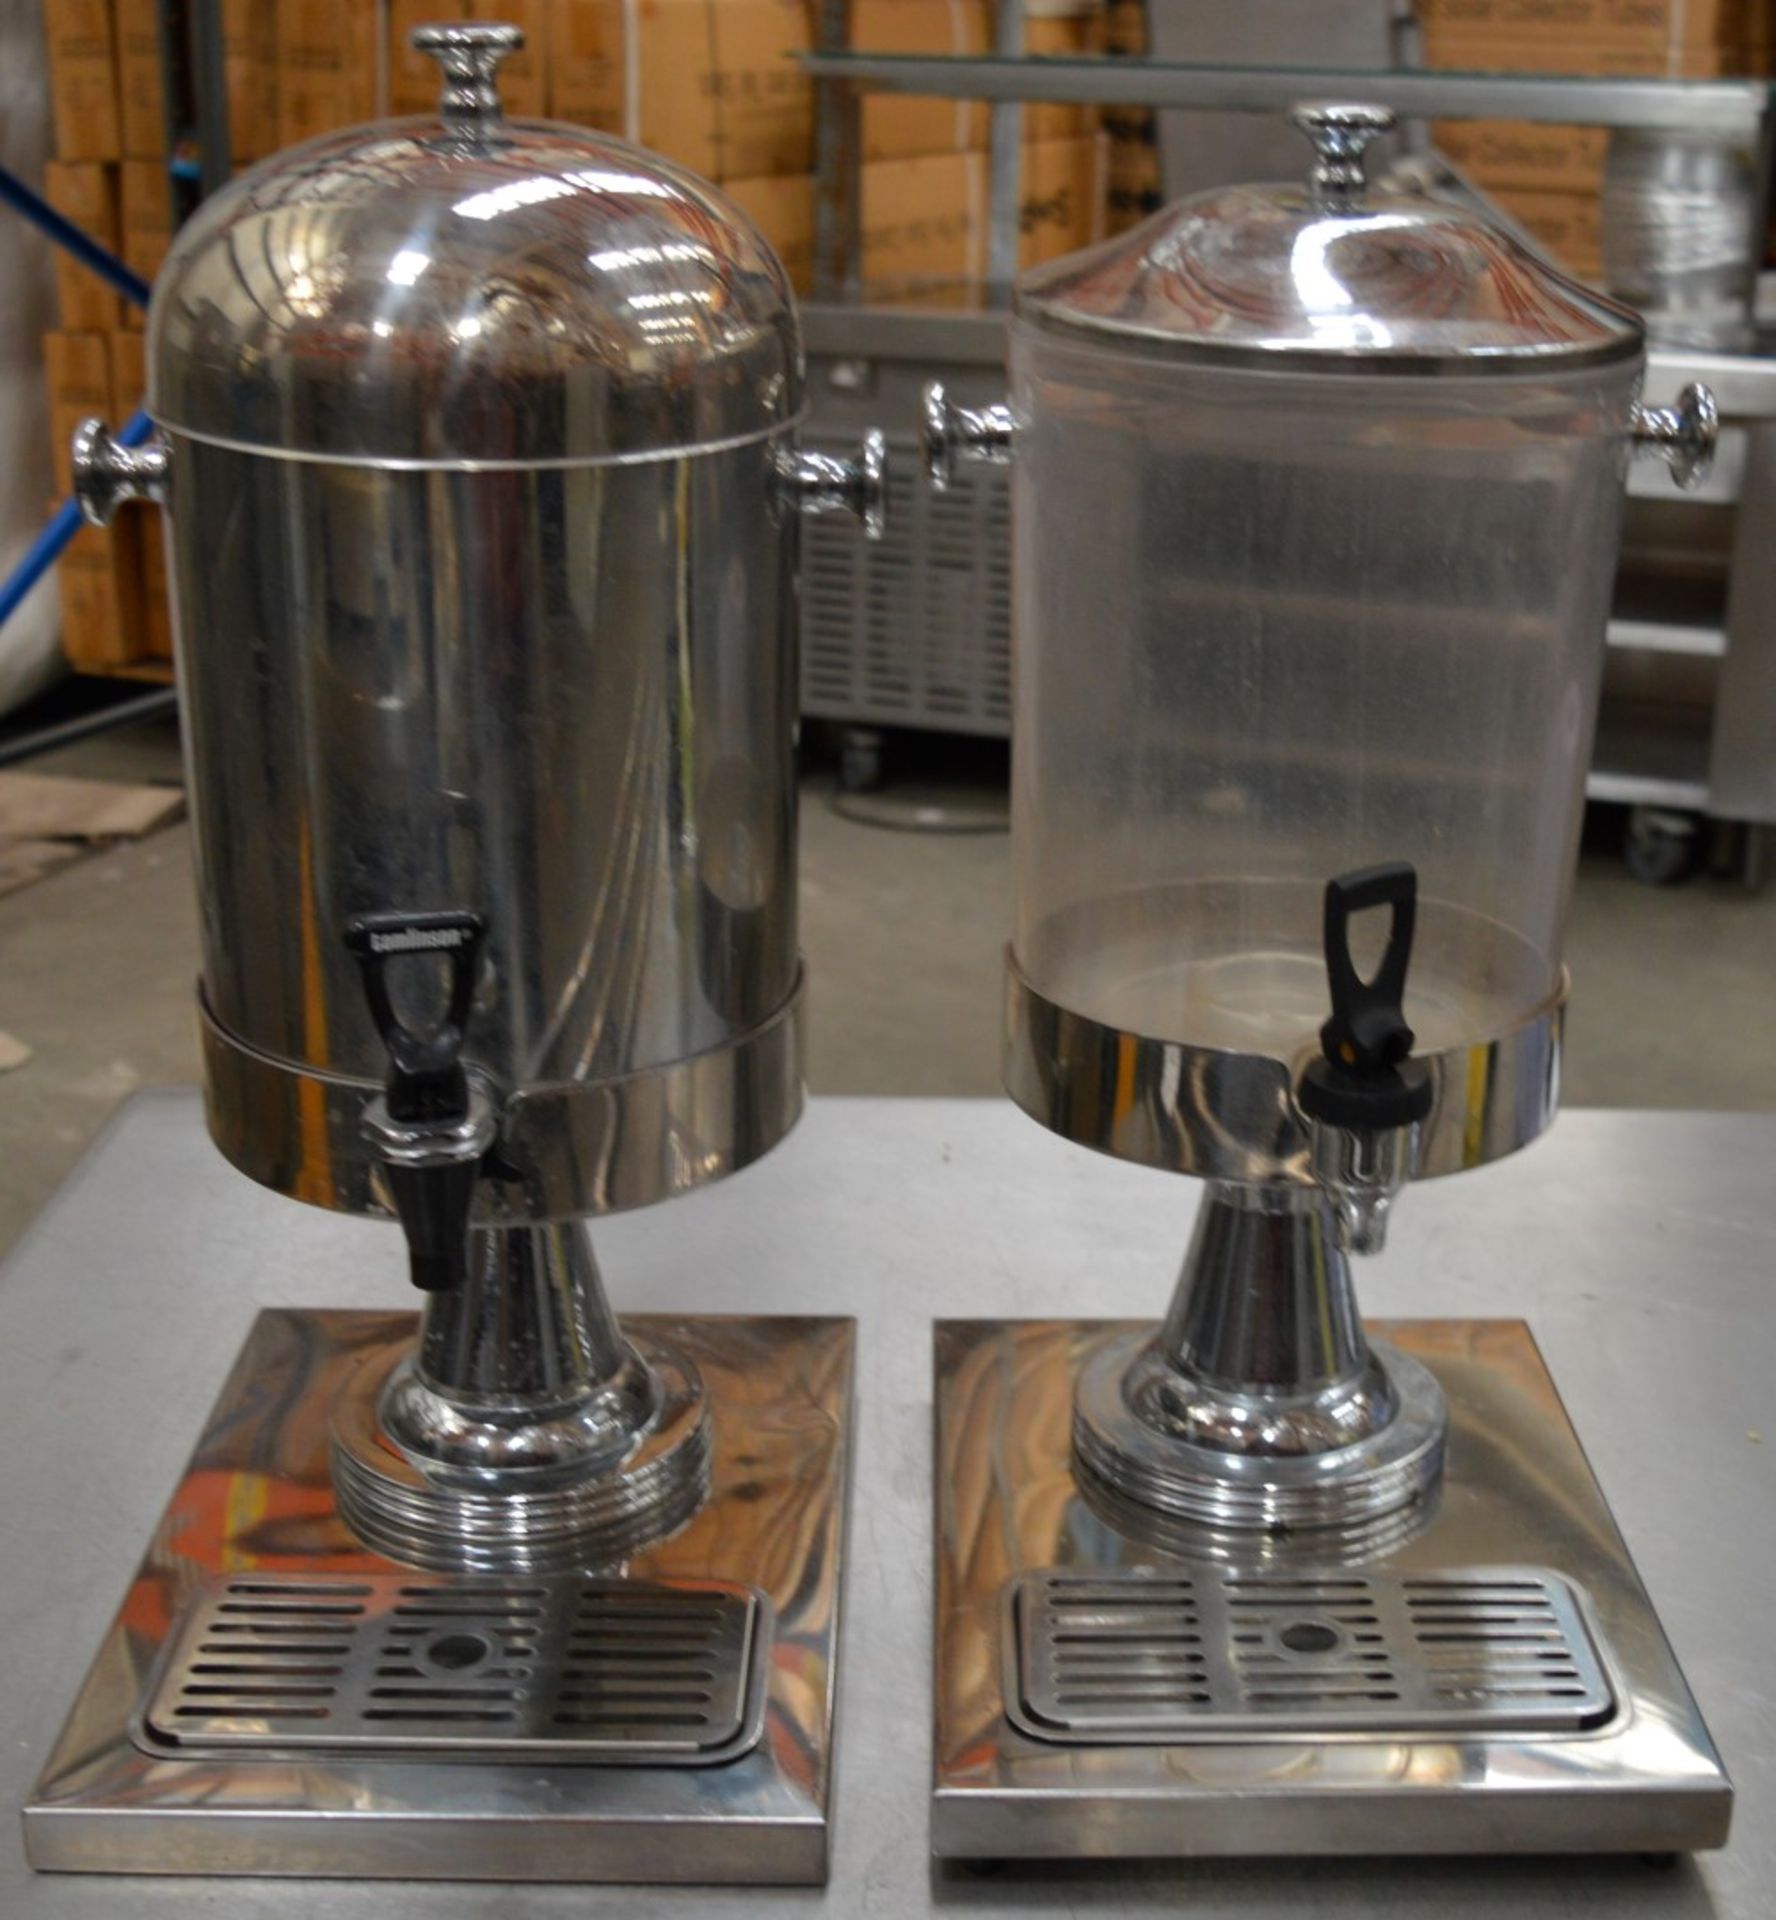 2 x Commercial Catering Drinks Dispensers Suitable For Fresh Milk and Orange Juice - CL057 - Height: